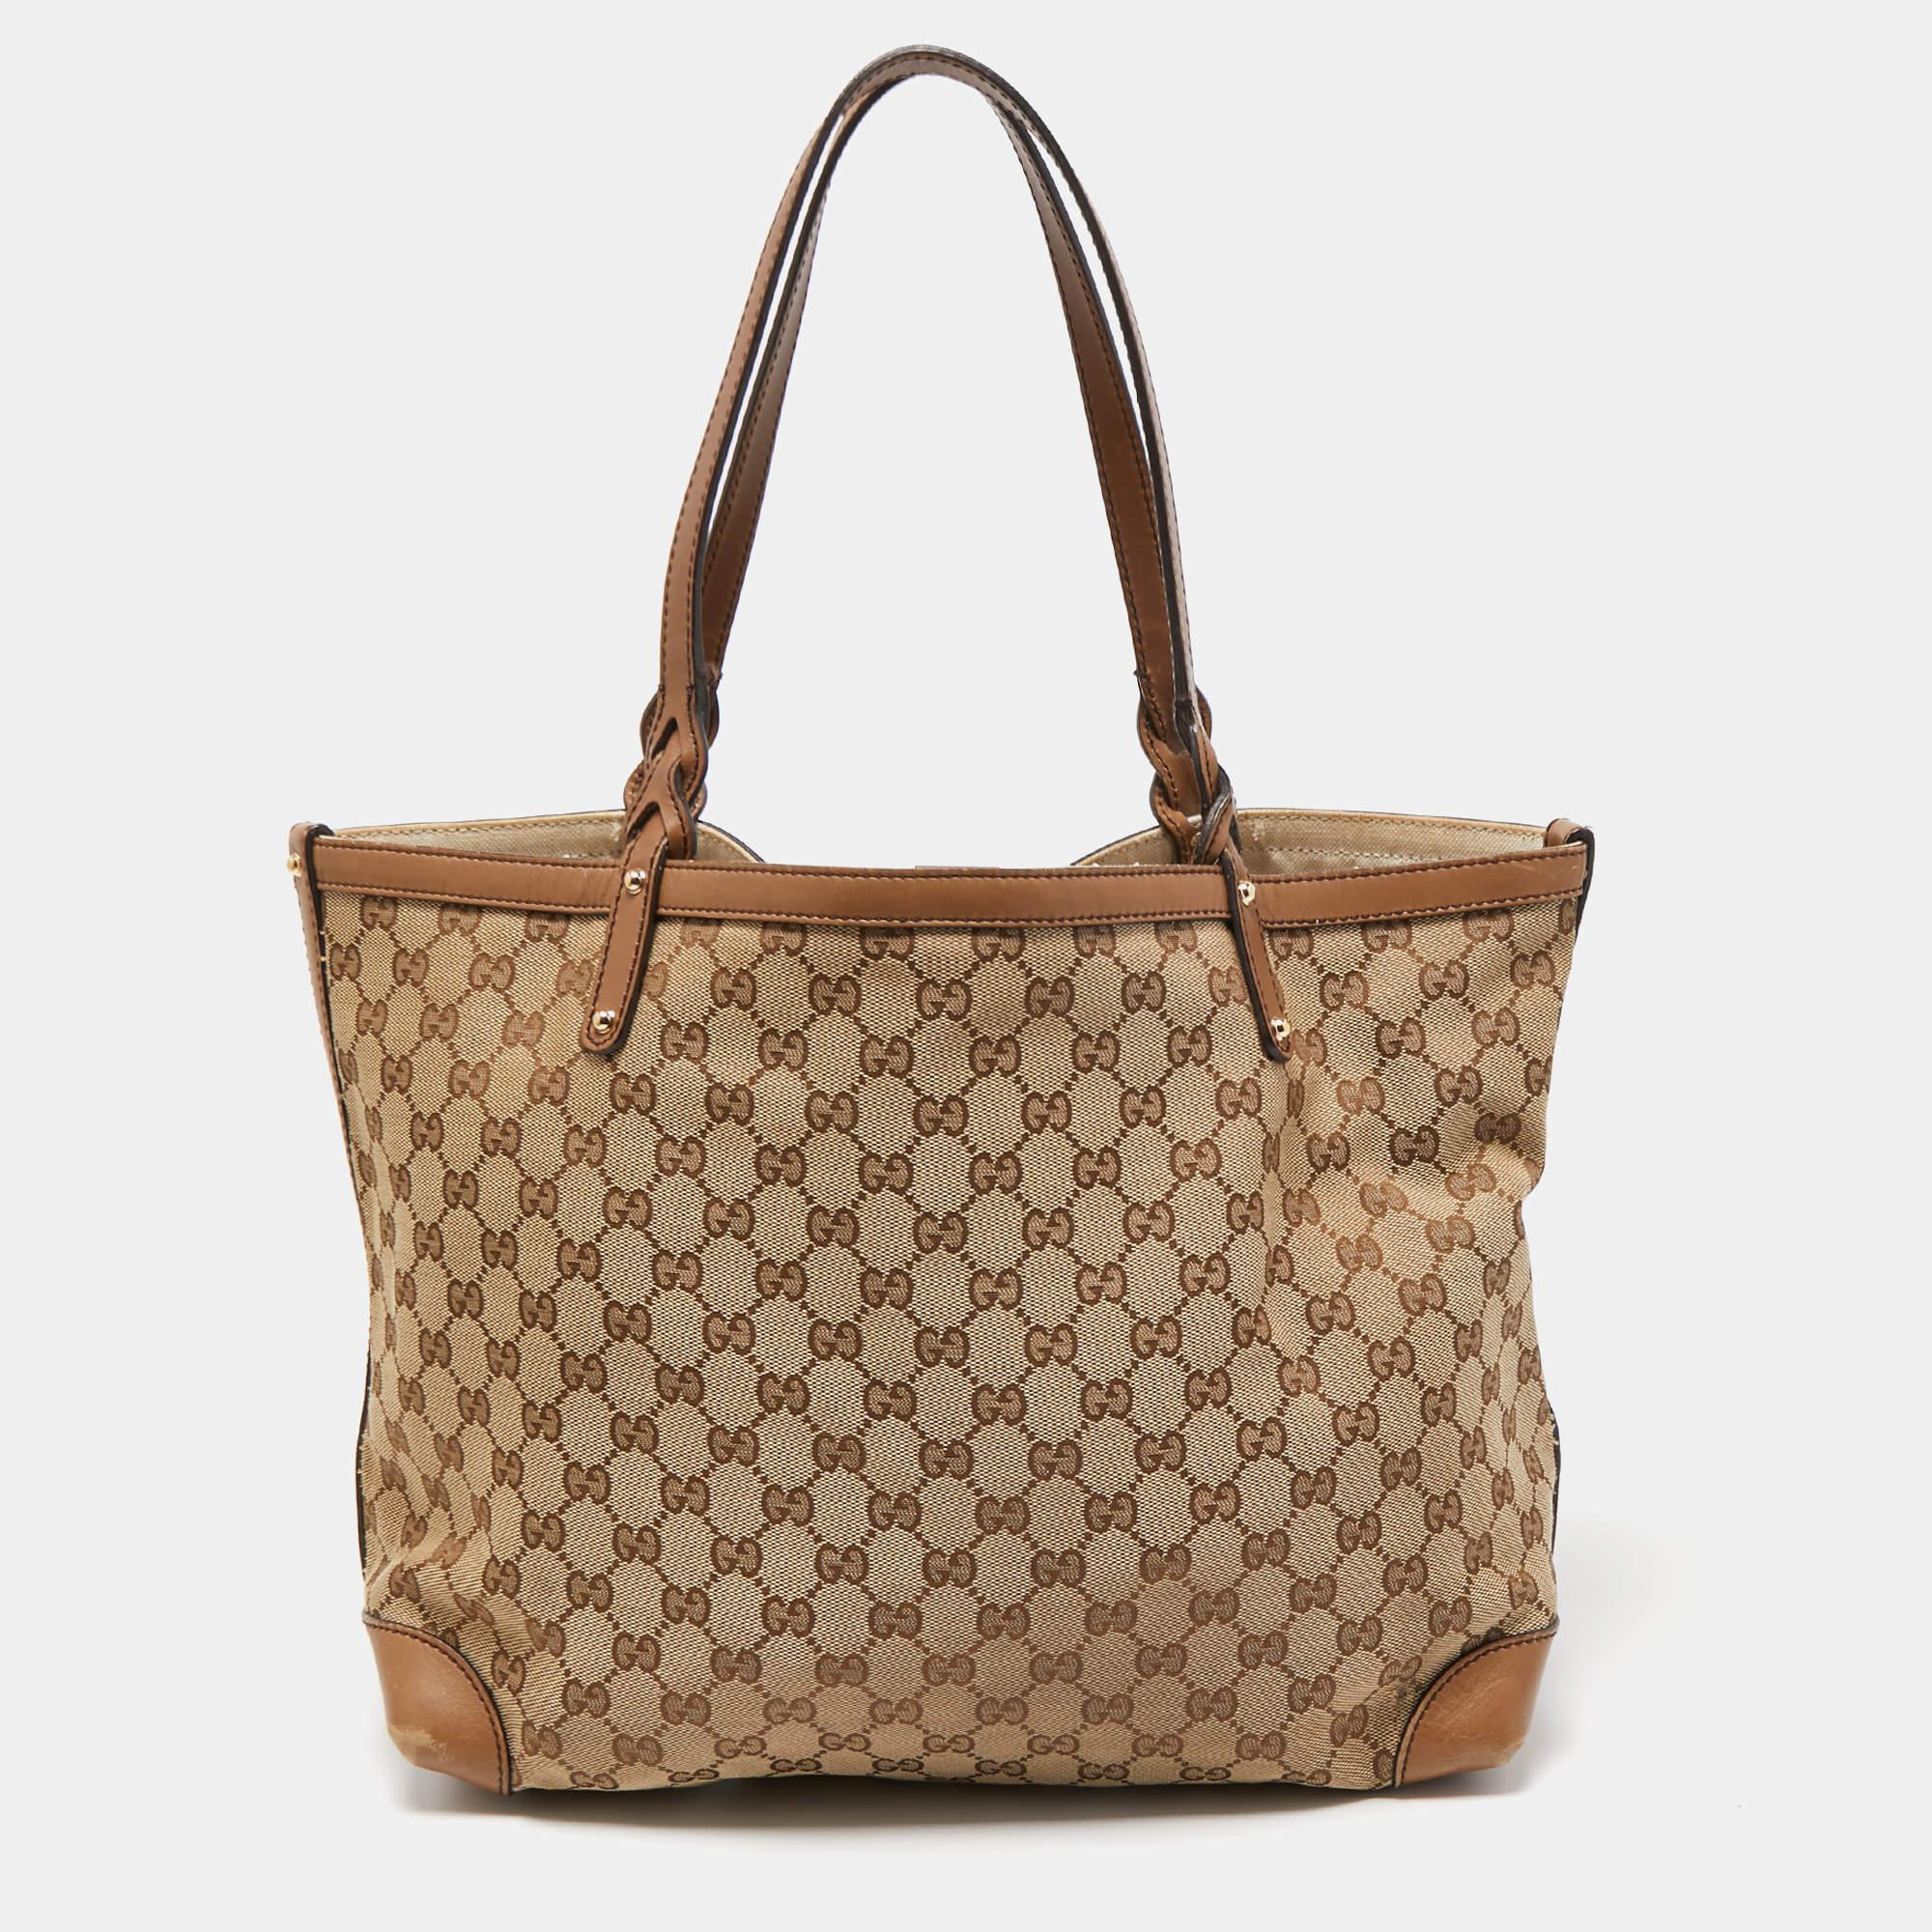 This Gucci tote is the ideal everyday bag. Made from canvas, its brown leather trim is matched with gold-tone hardware and a push lock closure. Its spacious design is lined with canvas and and comes with a matching leather pouch.

Includes: